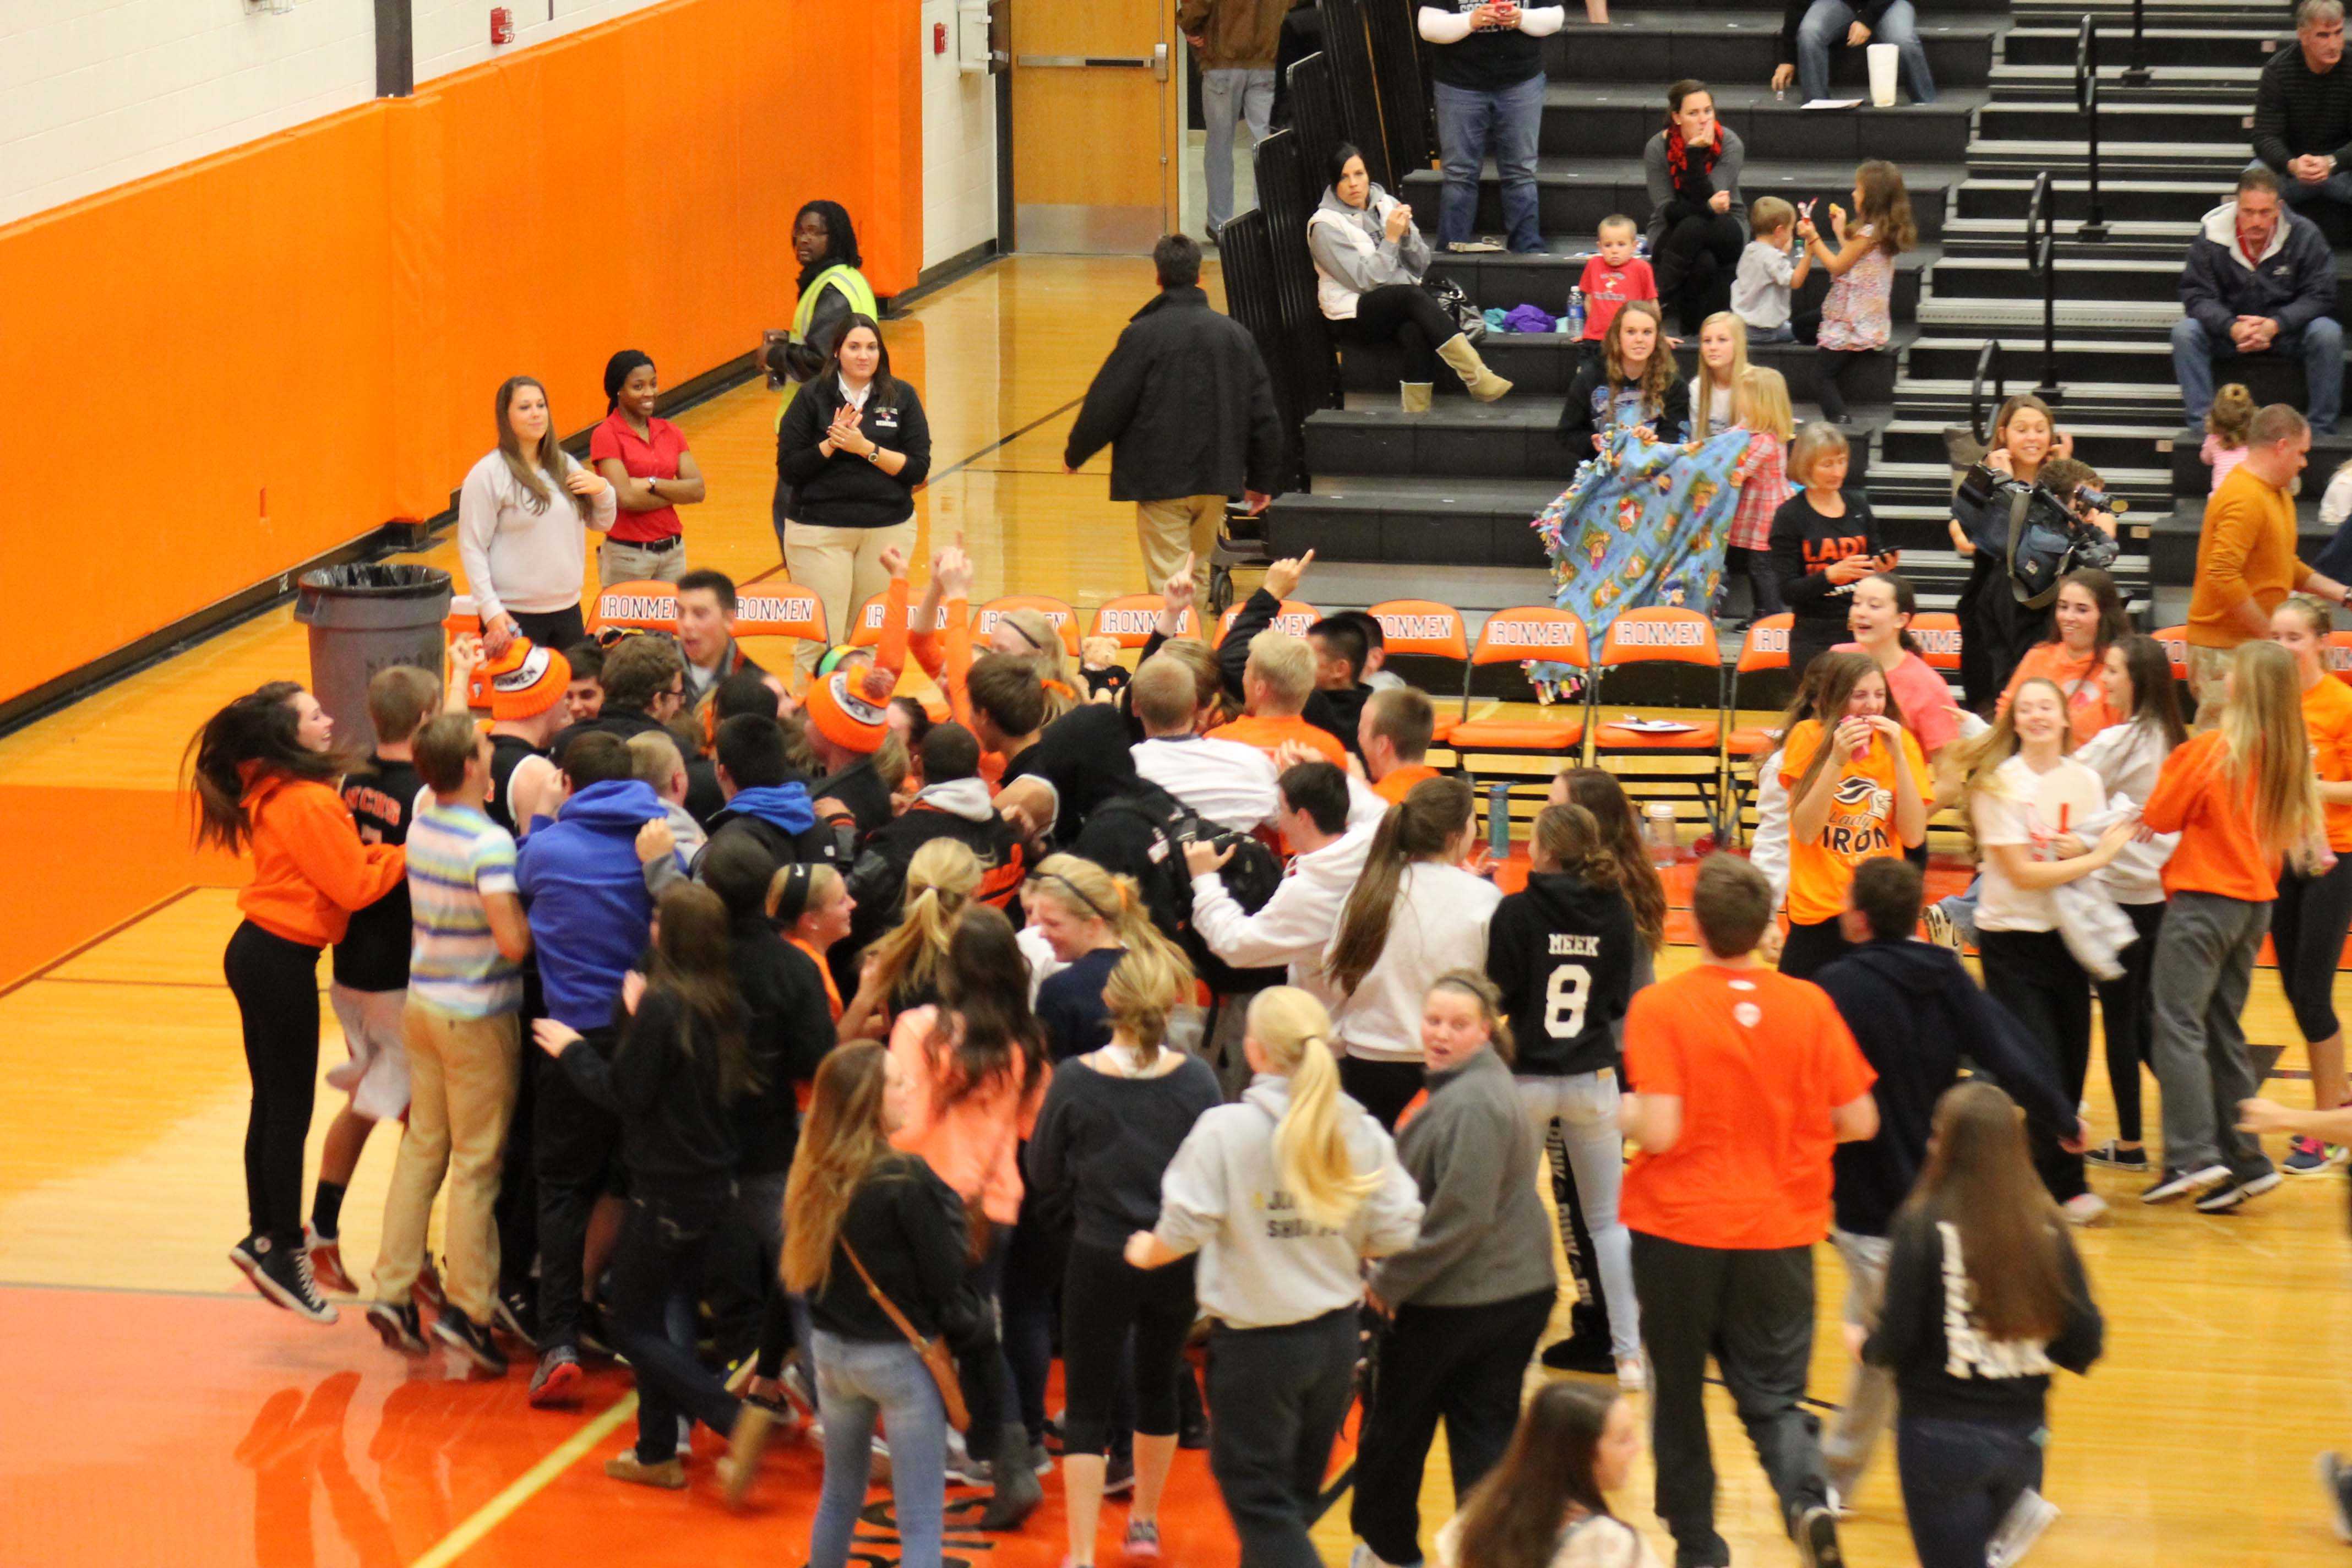 Normal Community fans storm the court to celebrate Lady Iron's Sectional win over the Senators.